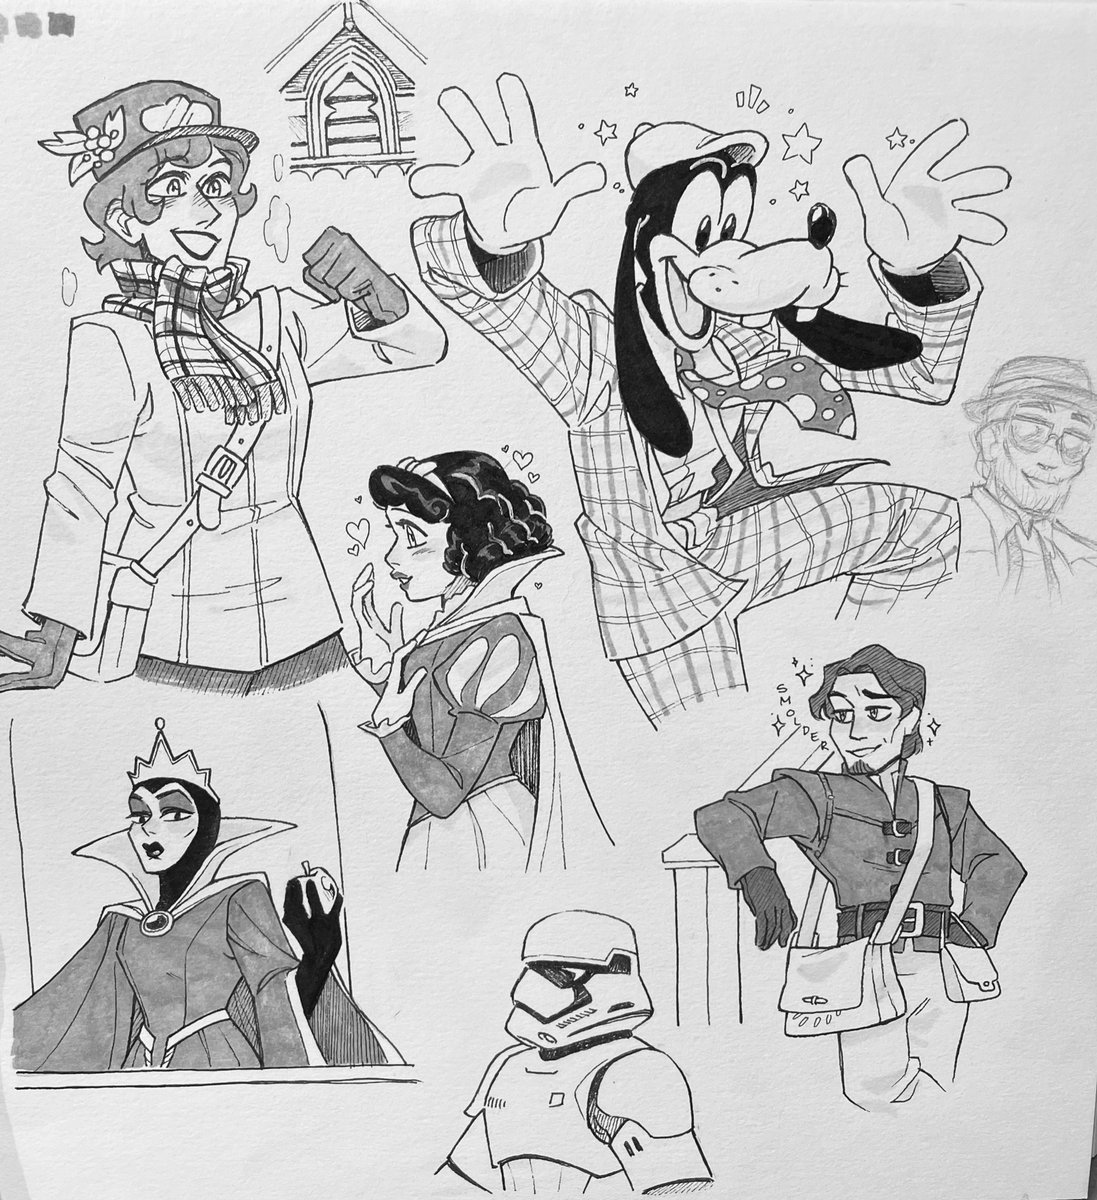 Sketchbook page from my Disney Drawing Day today! I was really happy with everyone came out and had a lot of fun. But DANG it was cold!!! And it even started sprinkling at one point. I'm enjoying the festive atmosphere but I am very ready for that warm sunny weather again. 